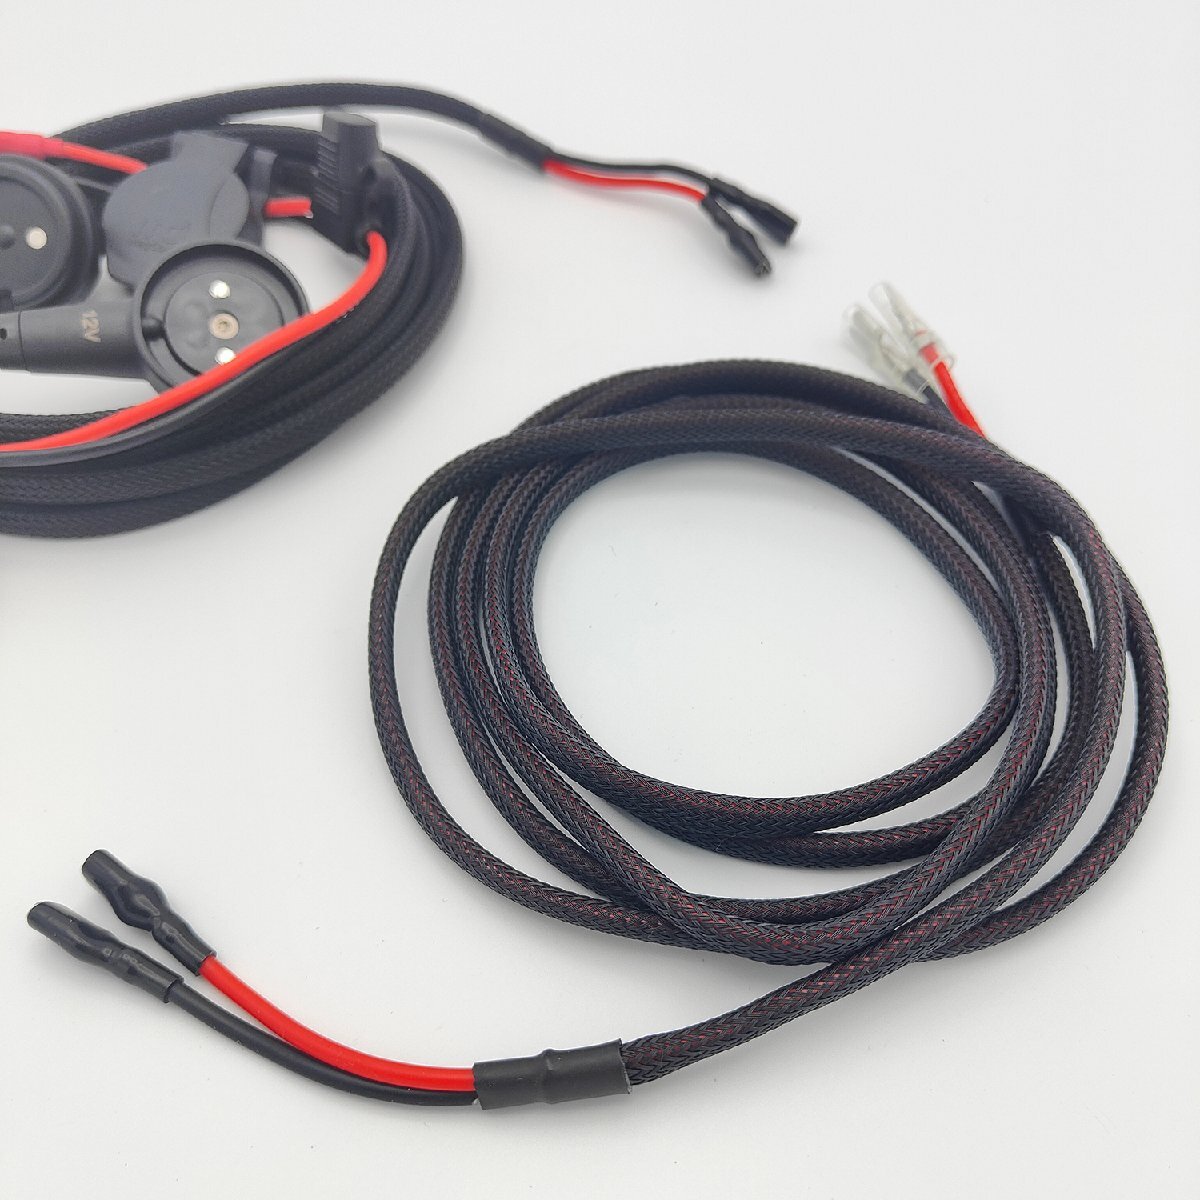 2 meter * extension Harness ( magnet charge terminal install * kit for addition Harness )